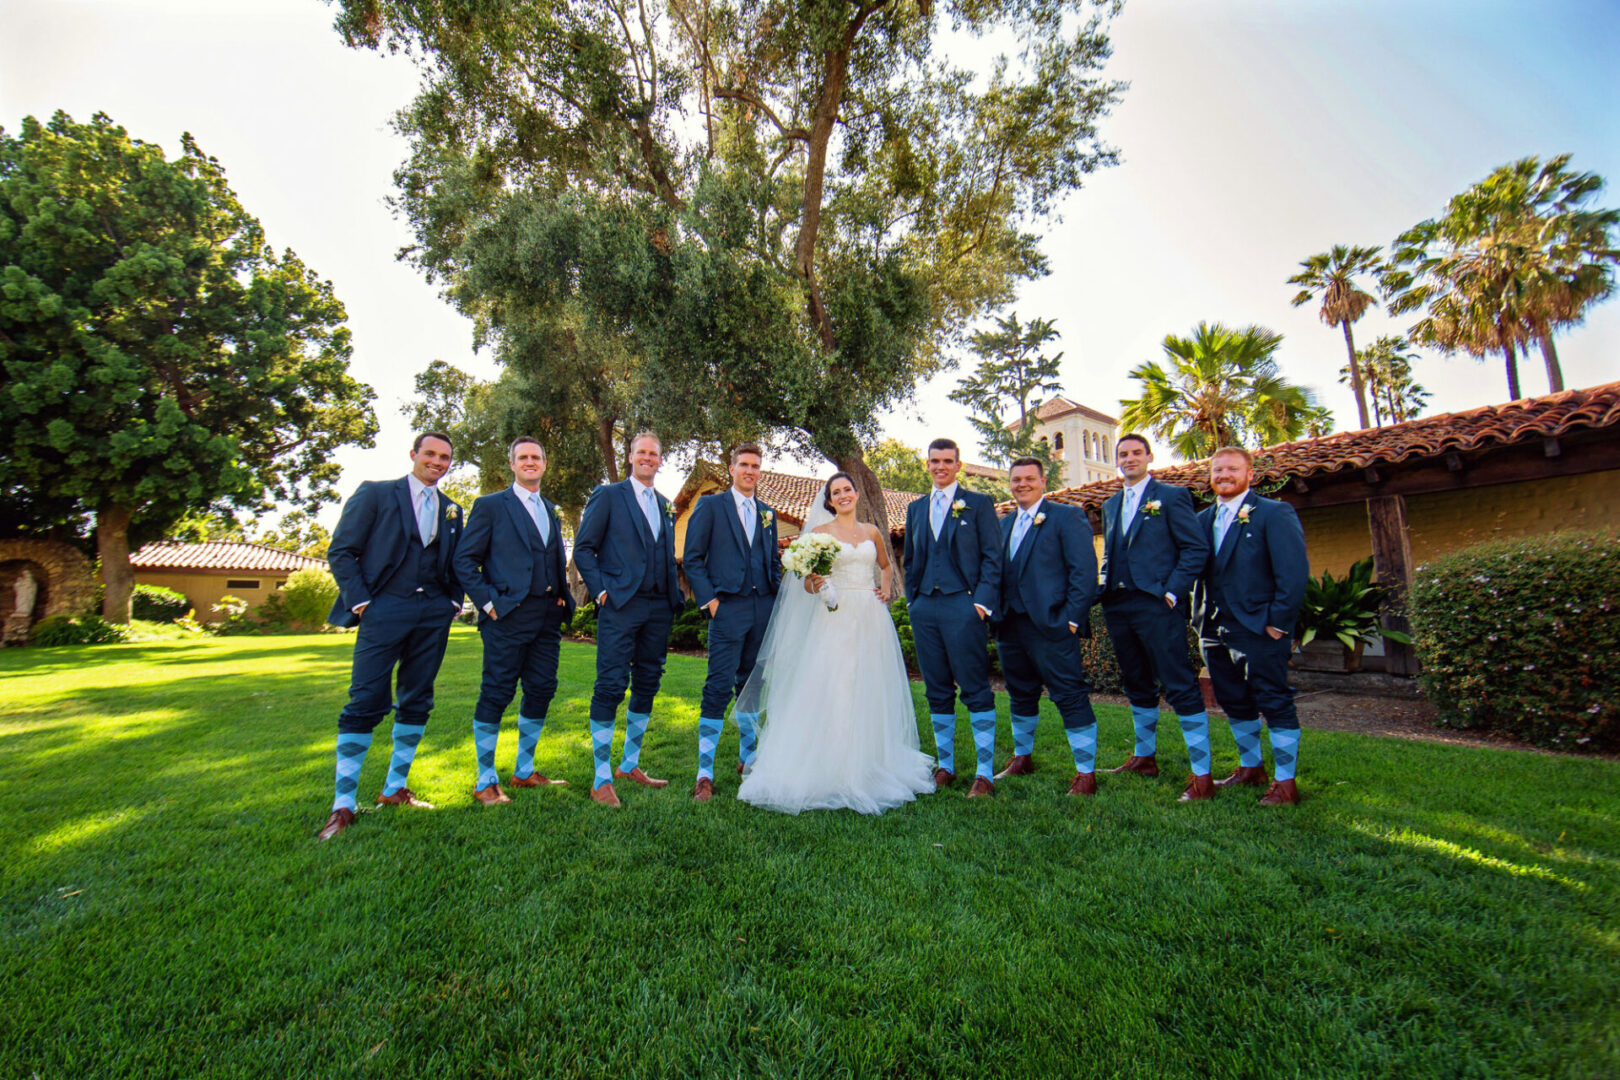 A bride standing together with some boys